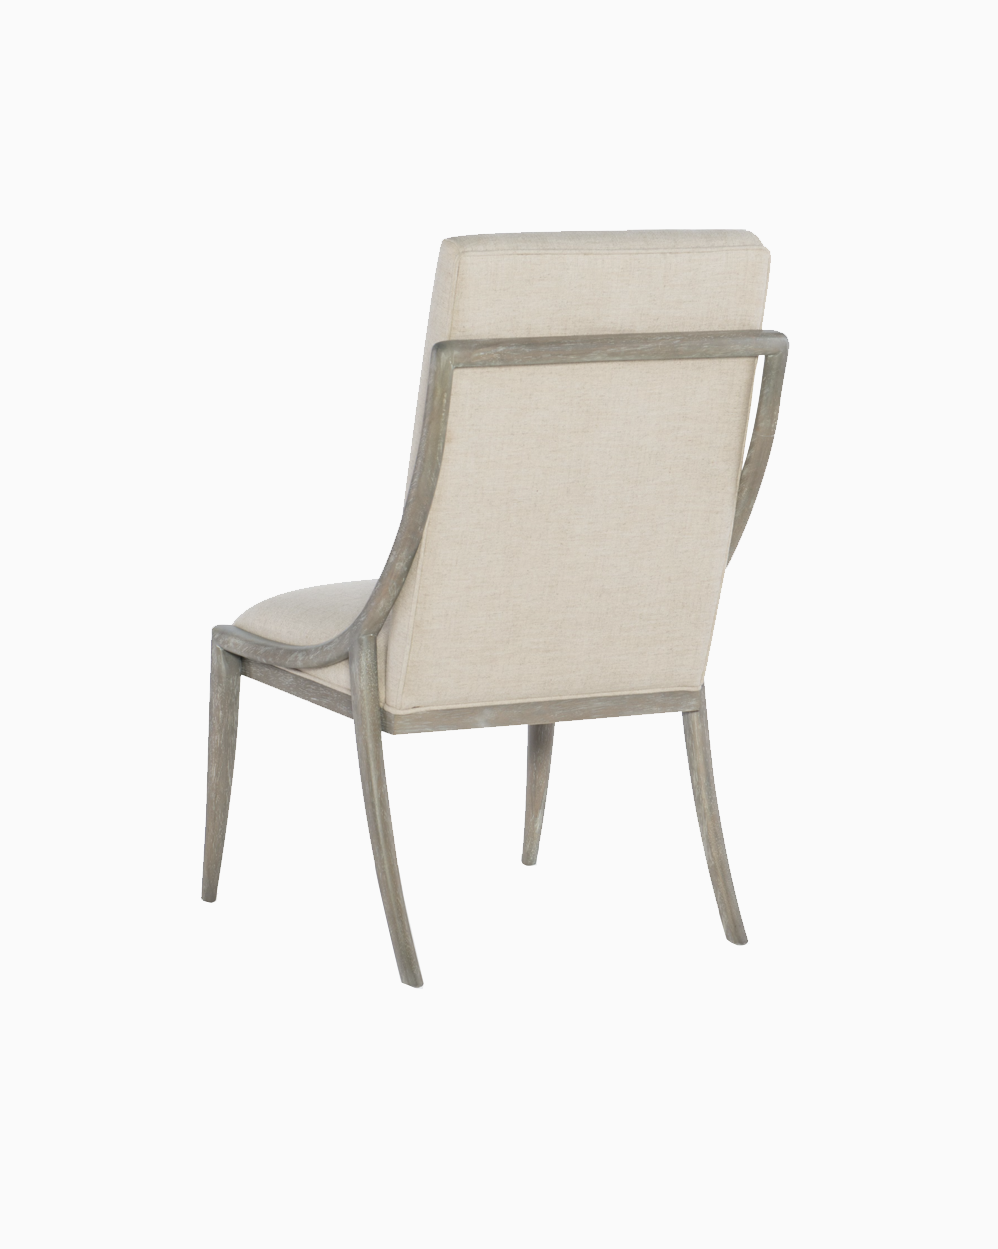 Affinity Slope Side Chair